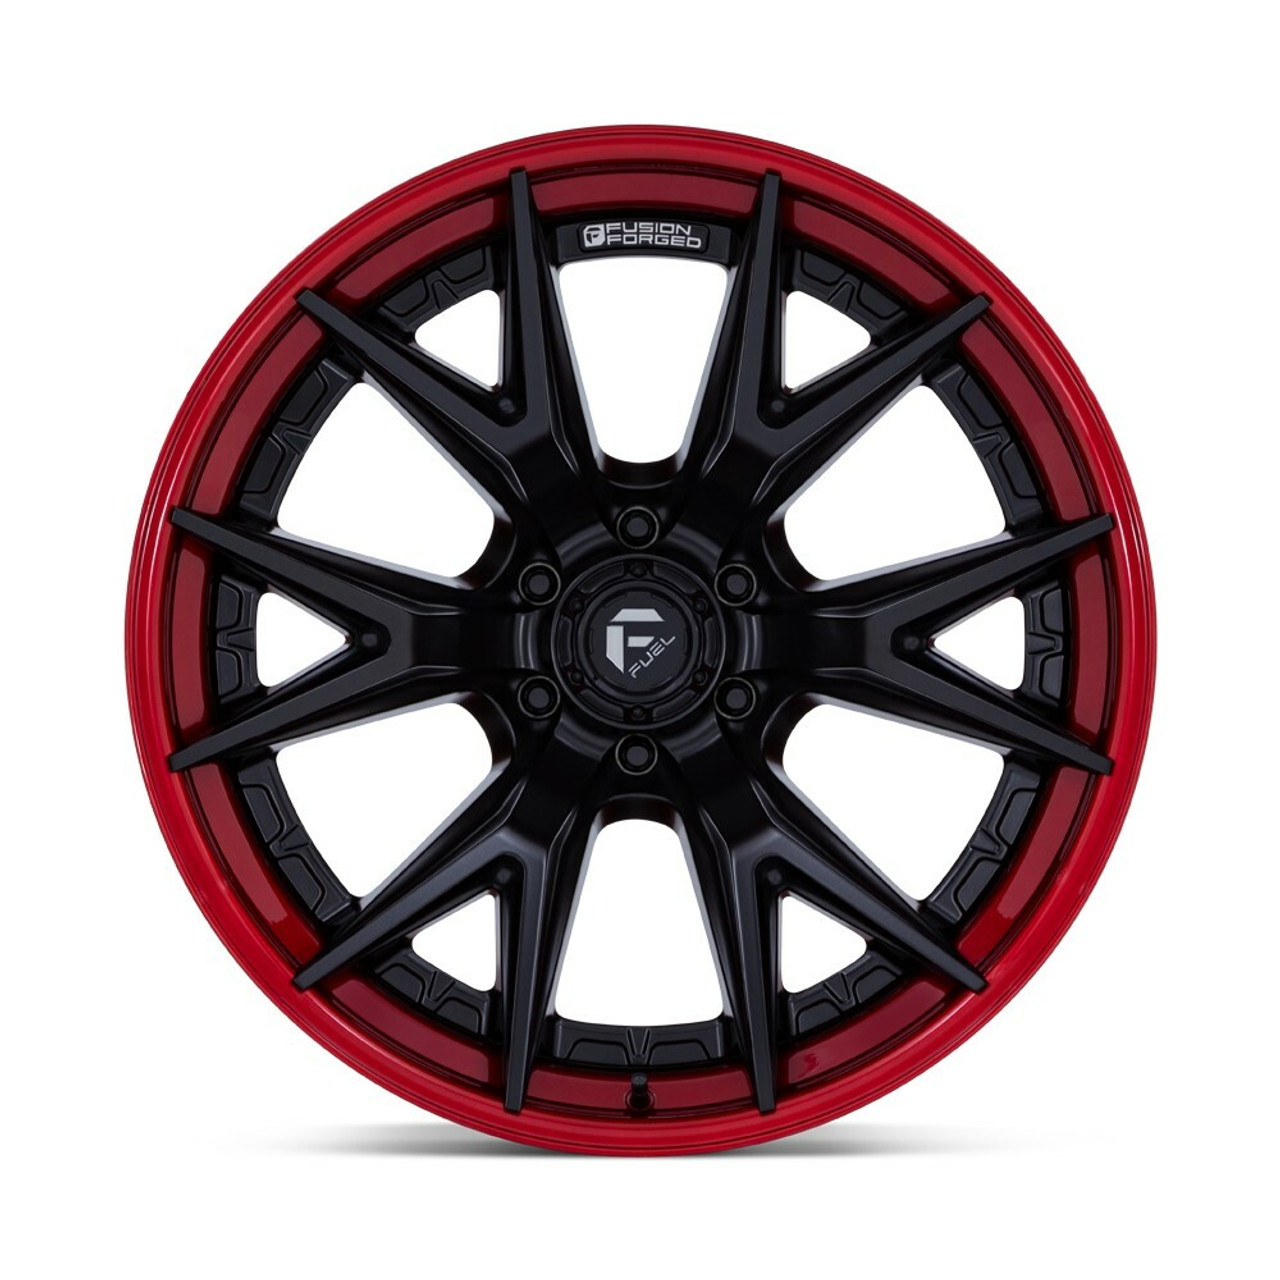 Fuel FC402 Catalyst 22x10 6x135 Matte Black Candy Red Lip 22" -18mm Lifted Wheel